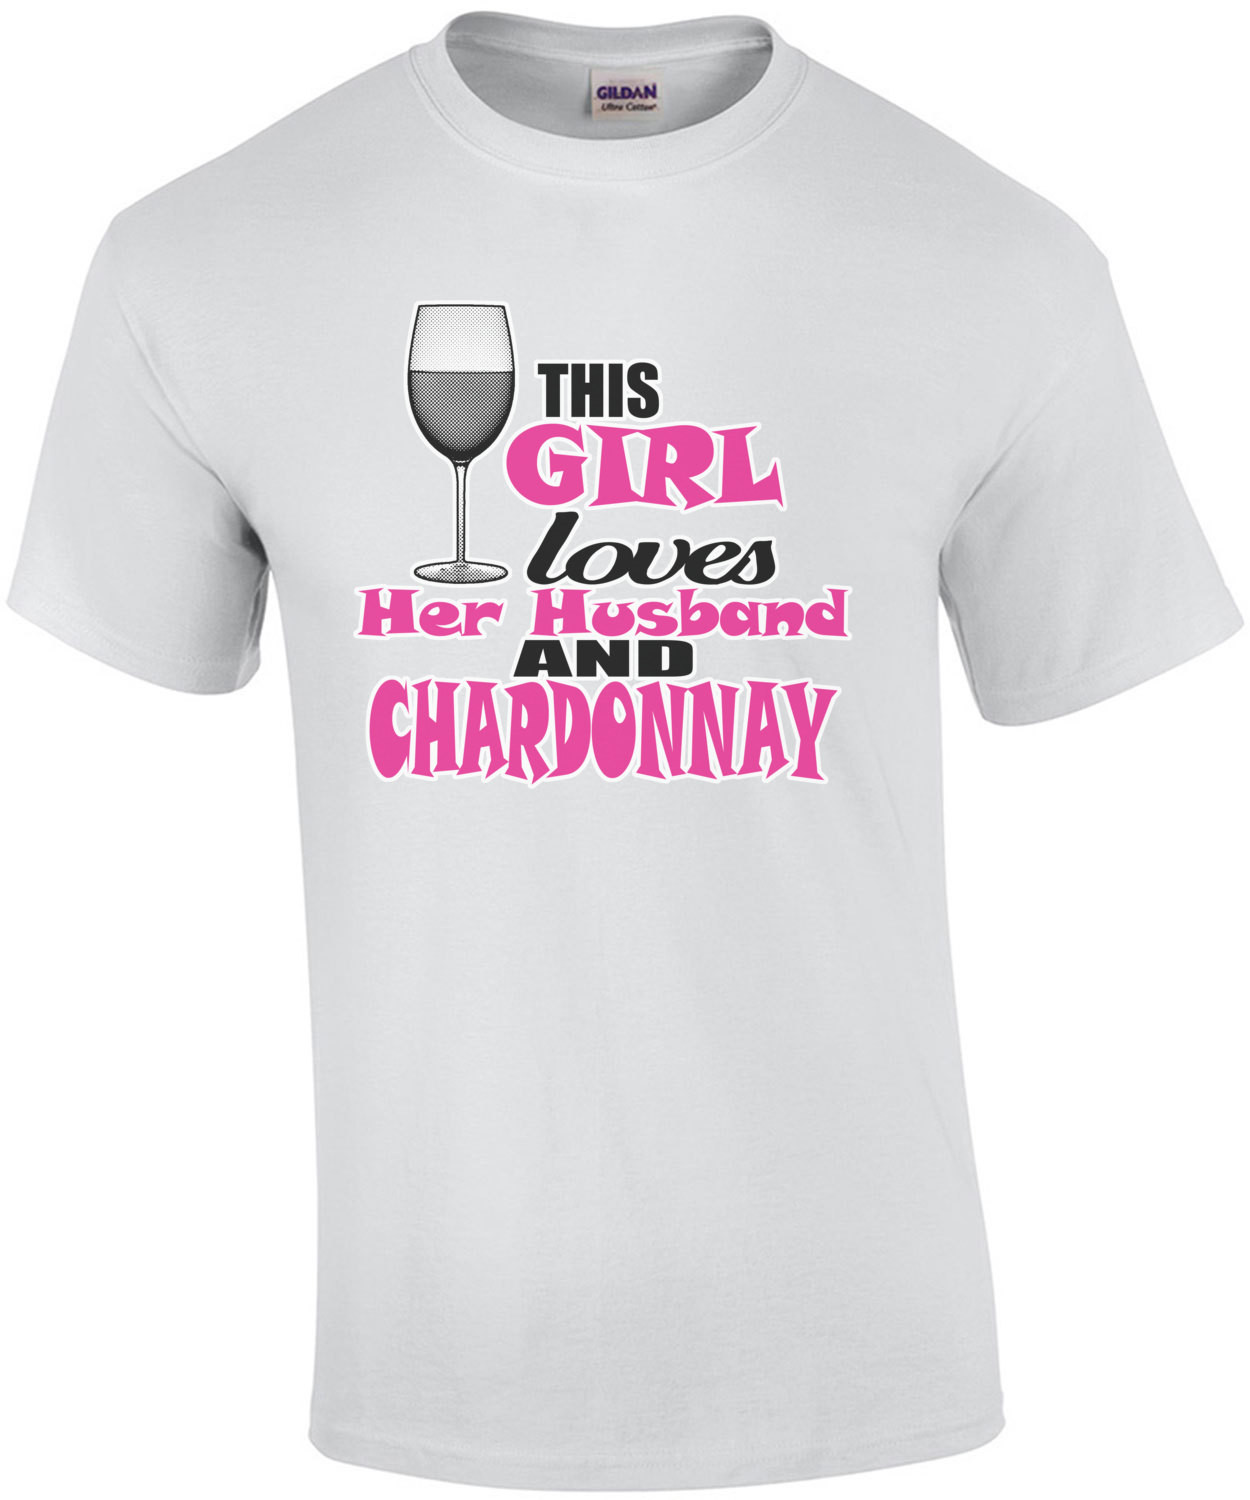 This Girl Loves Her Husband And Chardonnay T-Shirt